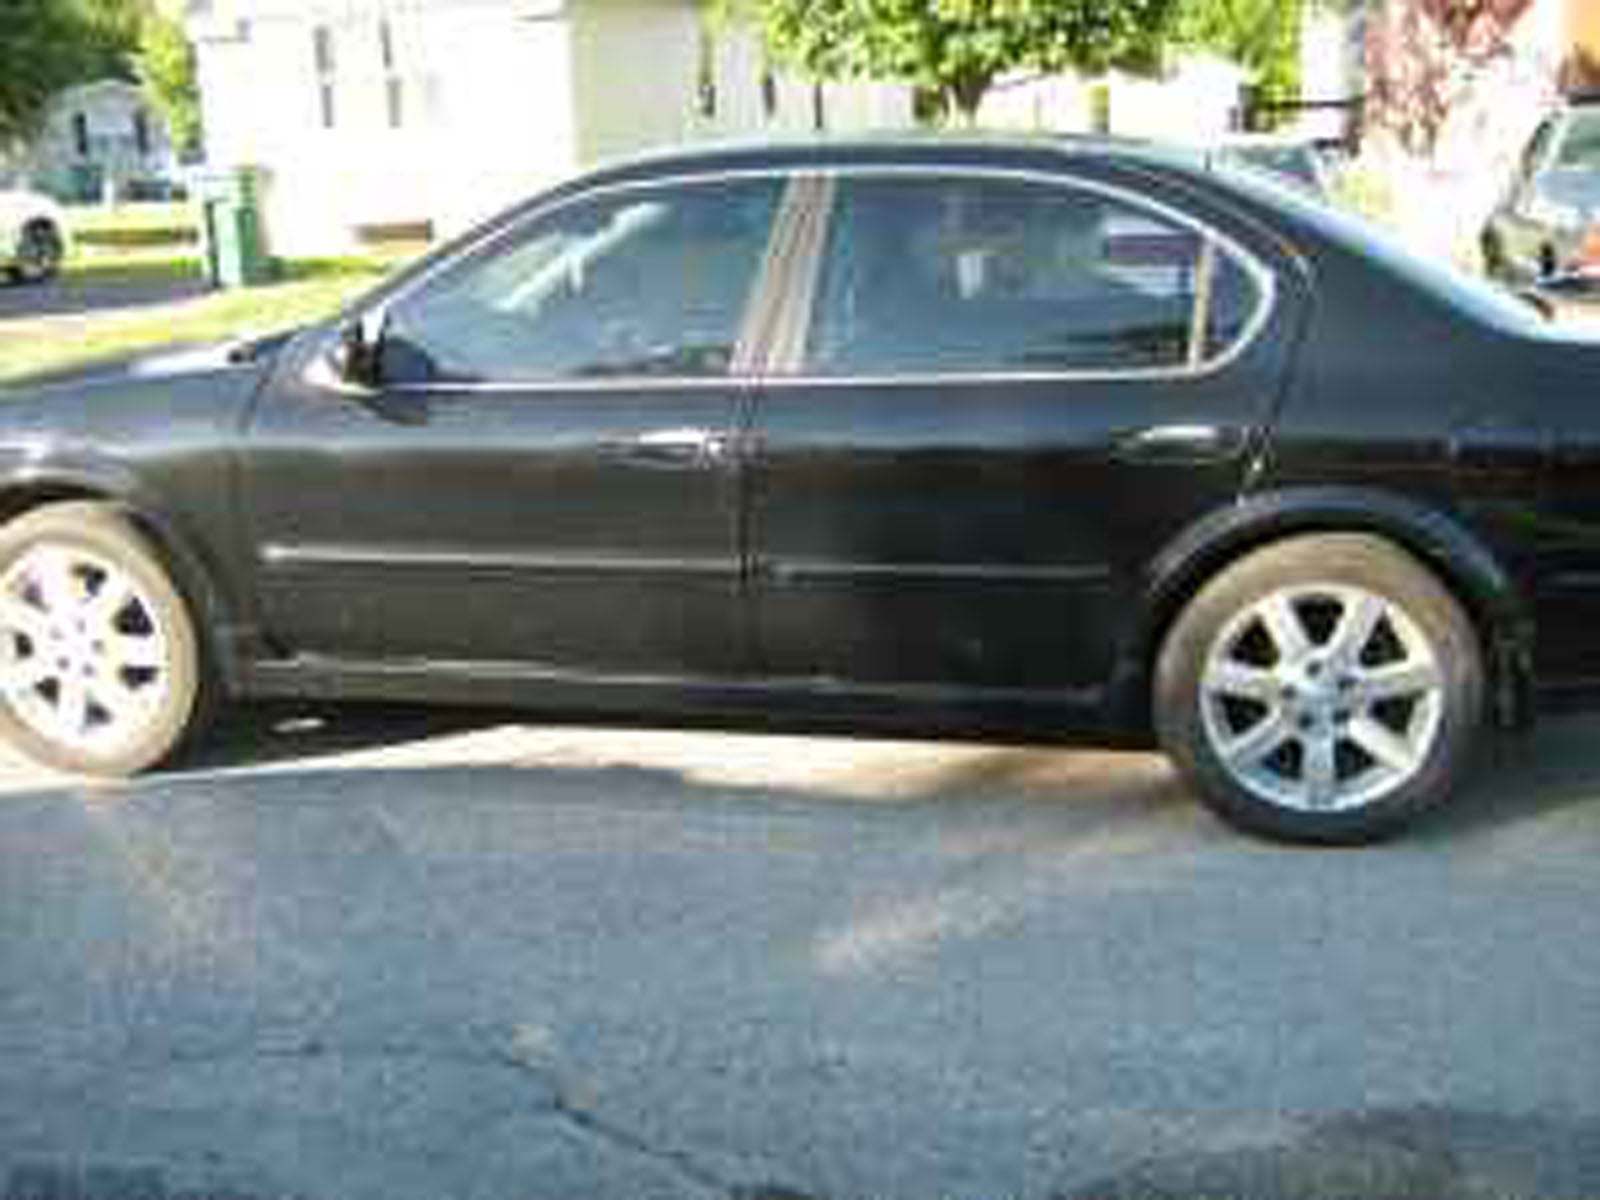 Nissan maxima for sale under 3000 #2